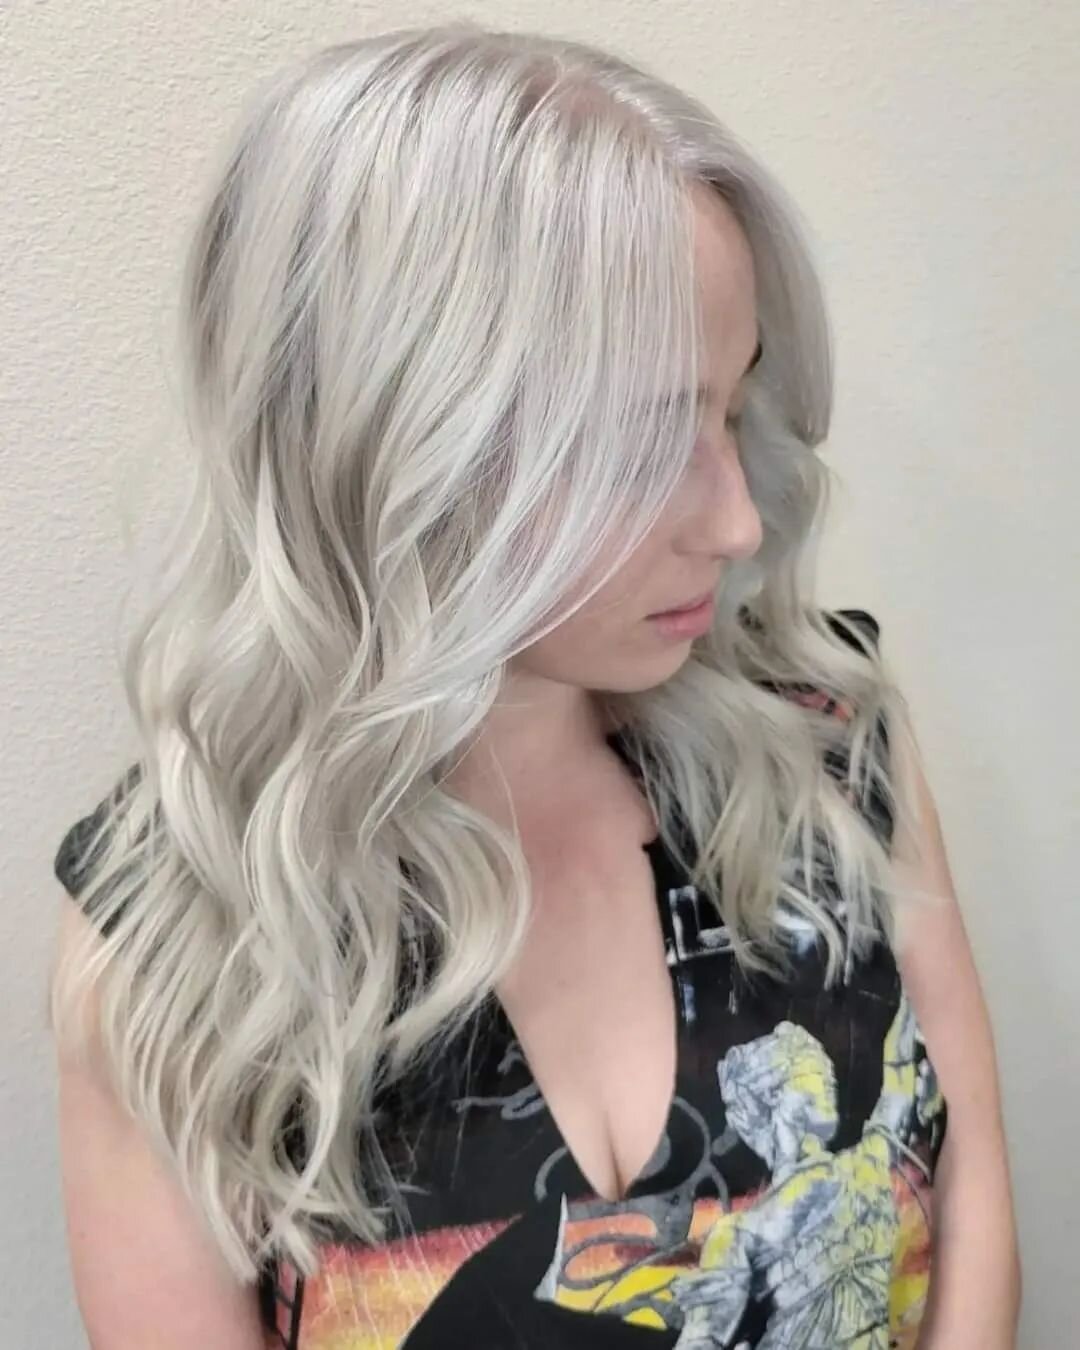 PLATINUM QUEEN!! 👑
Root and Tone maintenance on this Platinum Beauty! 🤍
♡
♡
Booking up quickly for Spring! Shoot me a text to book your appointment!
☎️ 720-839-3465 
♡
♡
#postinthrees #realpeople #chicksthatrock #stylistssupportingstylists #allshad